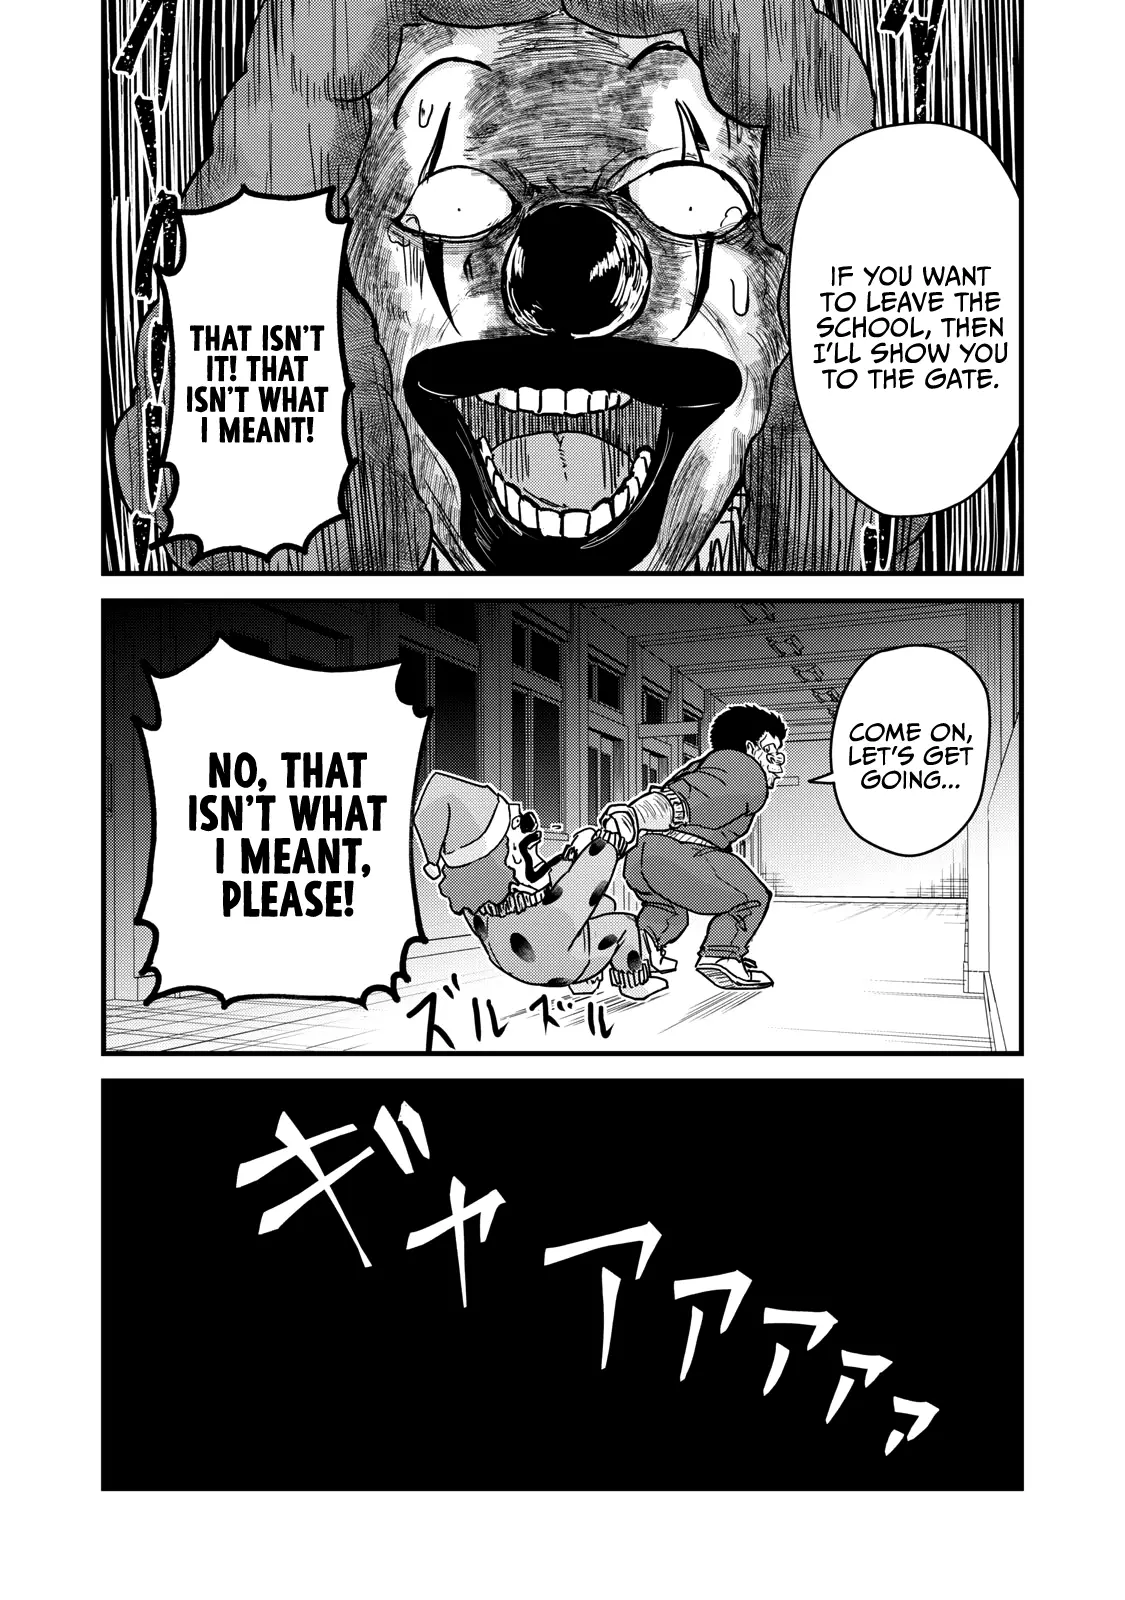 A Manga About The Kind Of Pe Teacher Who Dies At The Start Of A School Horror Movie - 69 page 18-22cca1ef